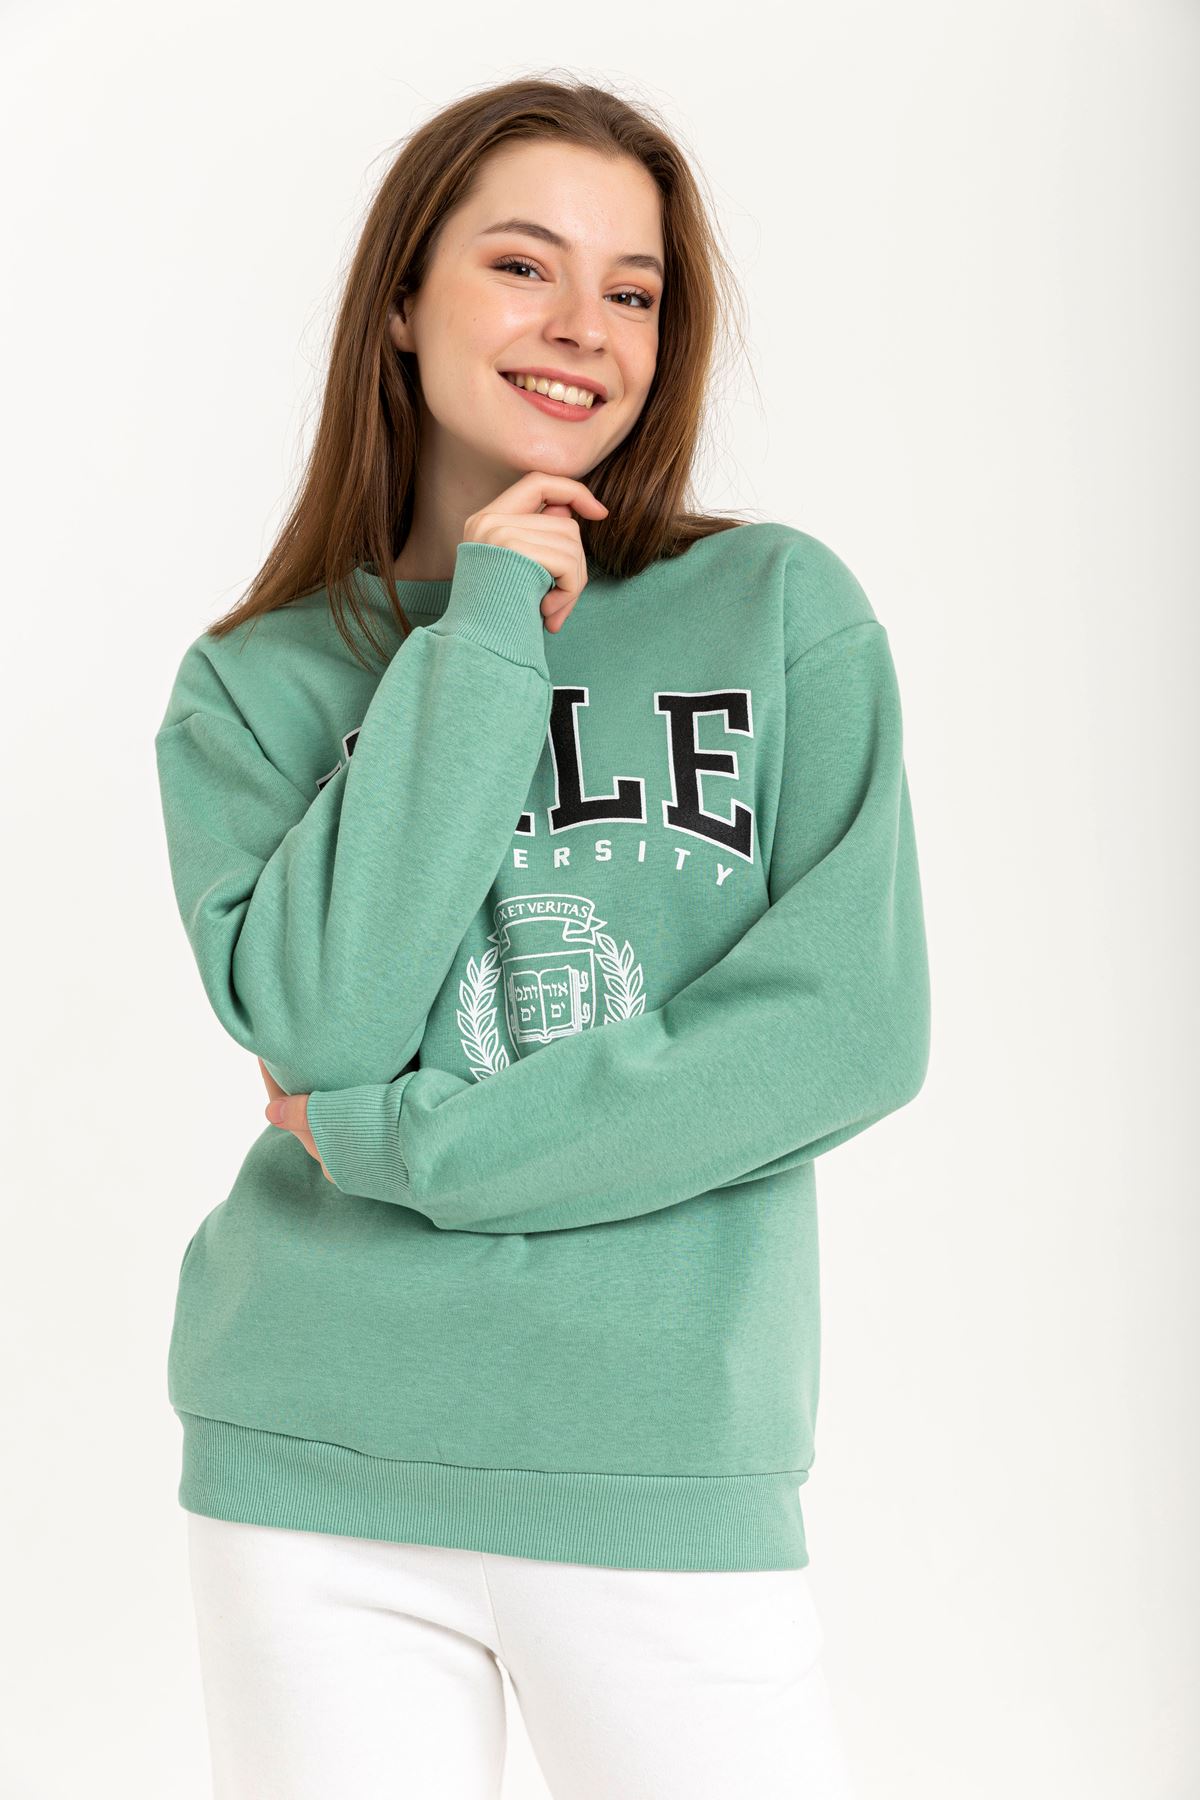 Third Knit With Wool İnside Fabric Long Sleeve Hip Height Inscribed Women Sweatshirt - Mint